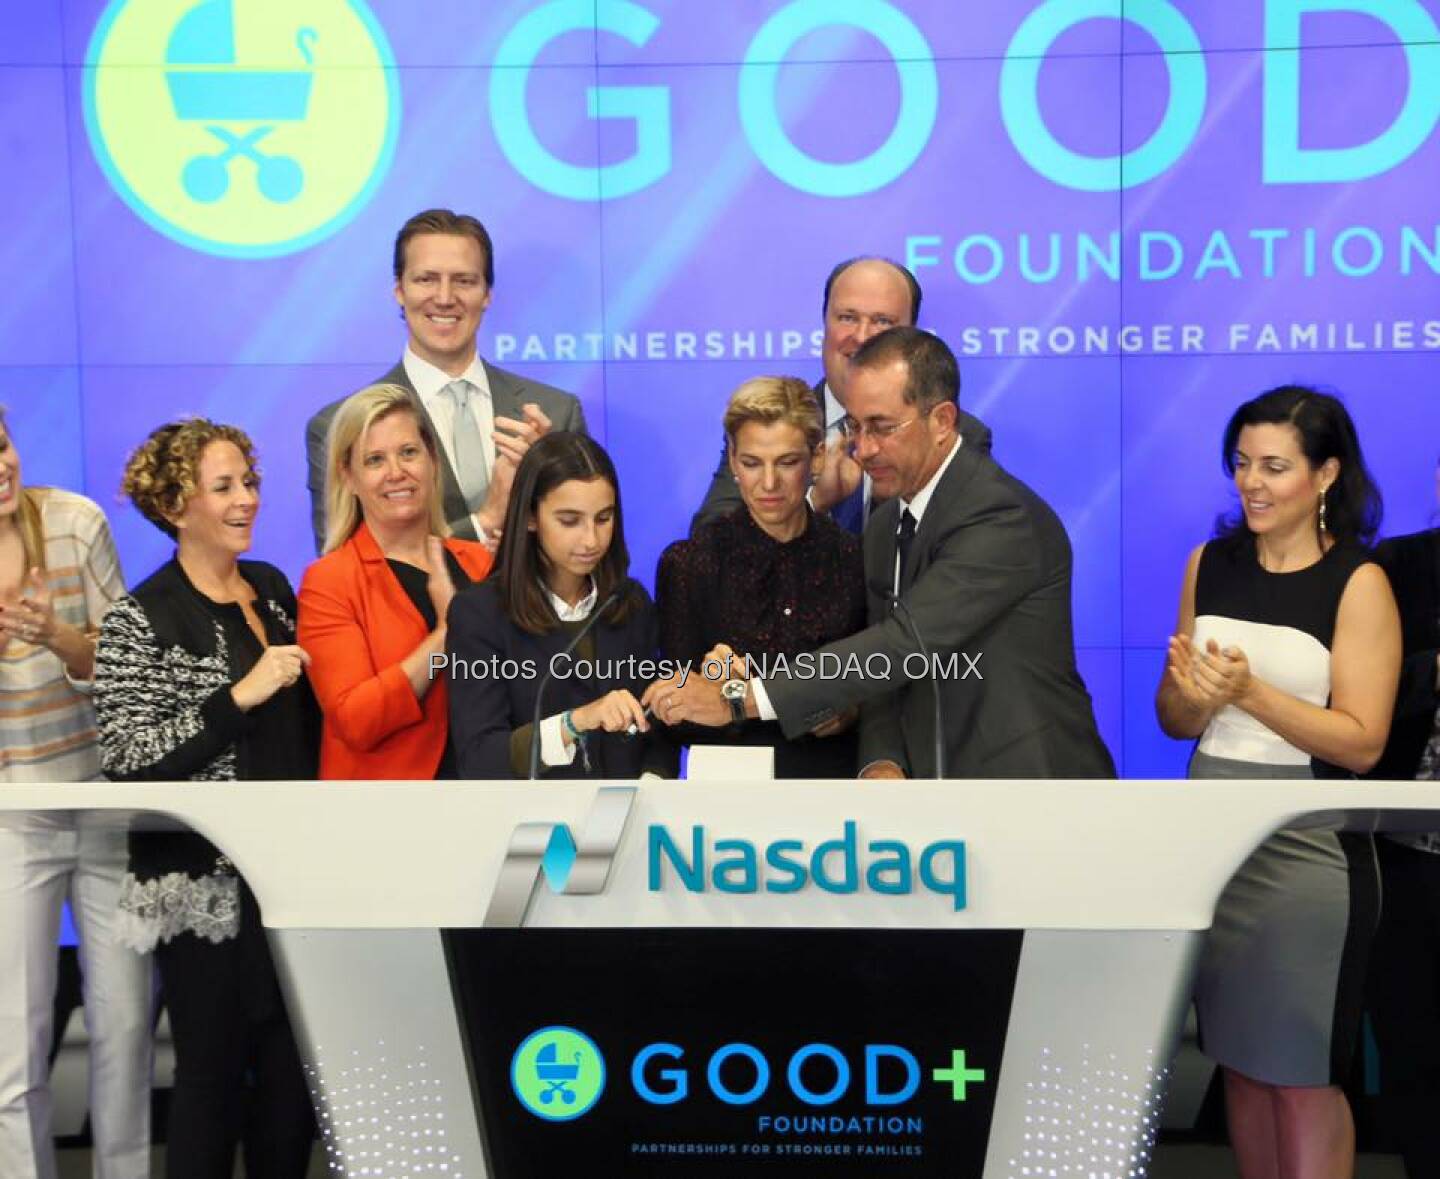 Great photos of Jessica and Jerry Seinfeld ringing the Nasdaq Opening Bell for the GOOD+ Foundation!  Source: http://facebook.com/NASDAQ